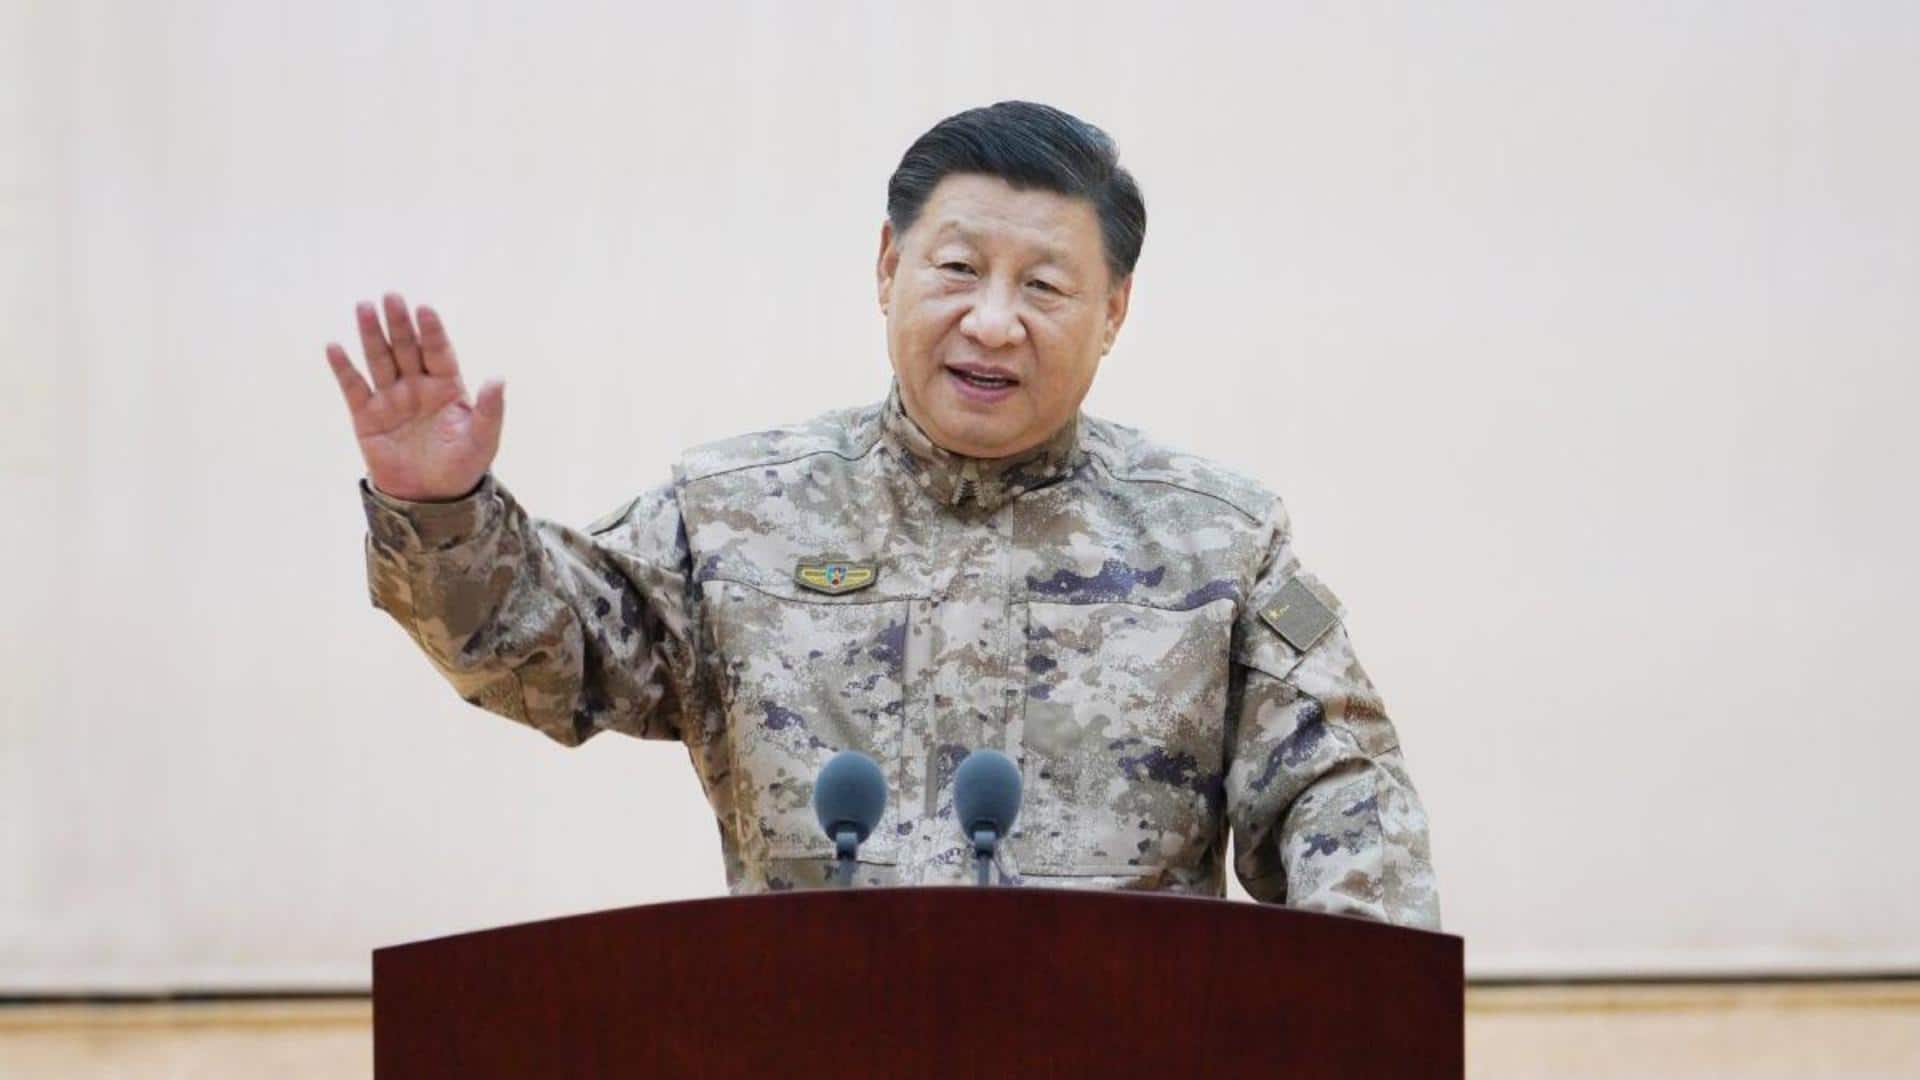 Be combat-ready to win wars: President Jinping tells Chinese Army